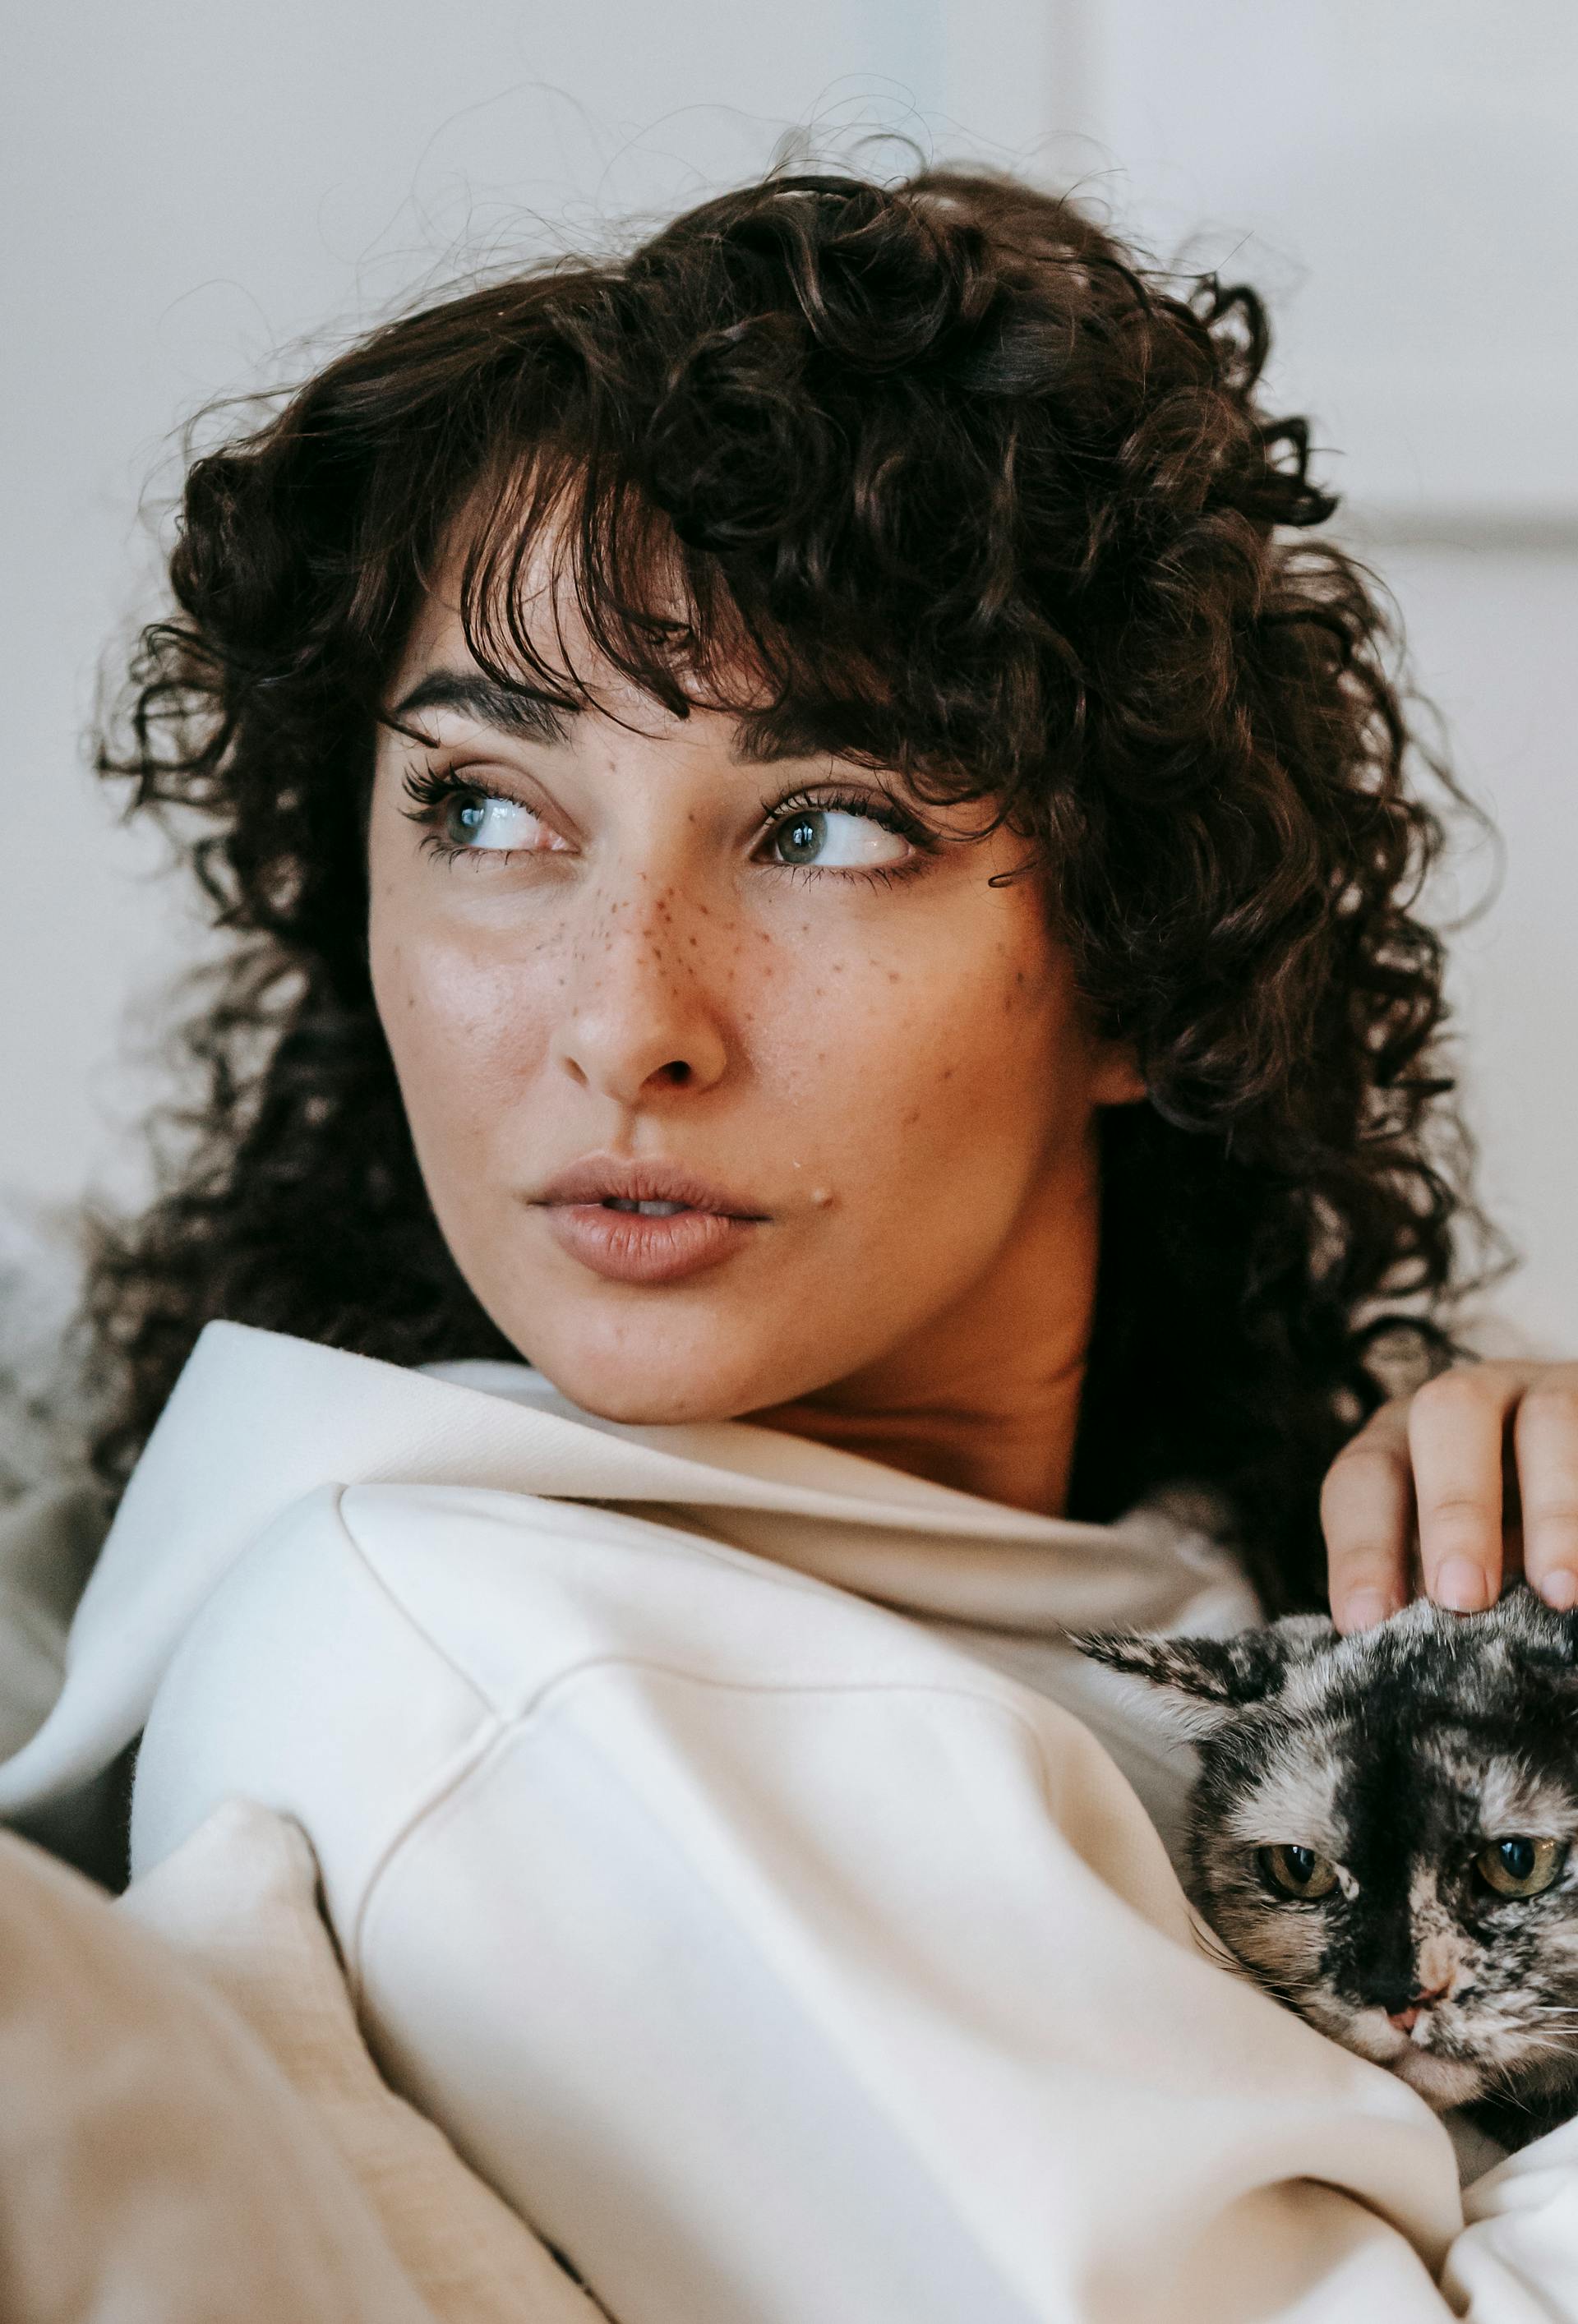 A woman with her pet cat | Source: Pexels